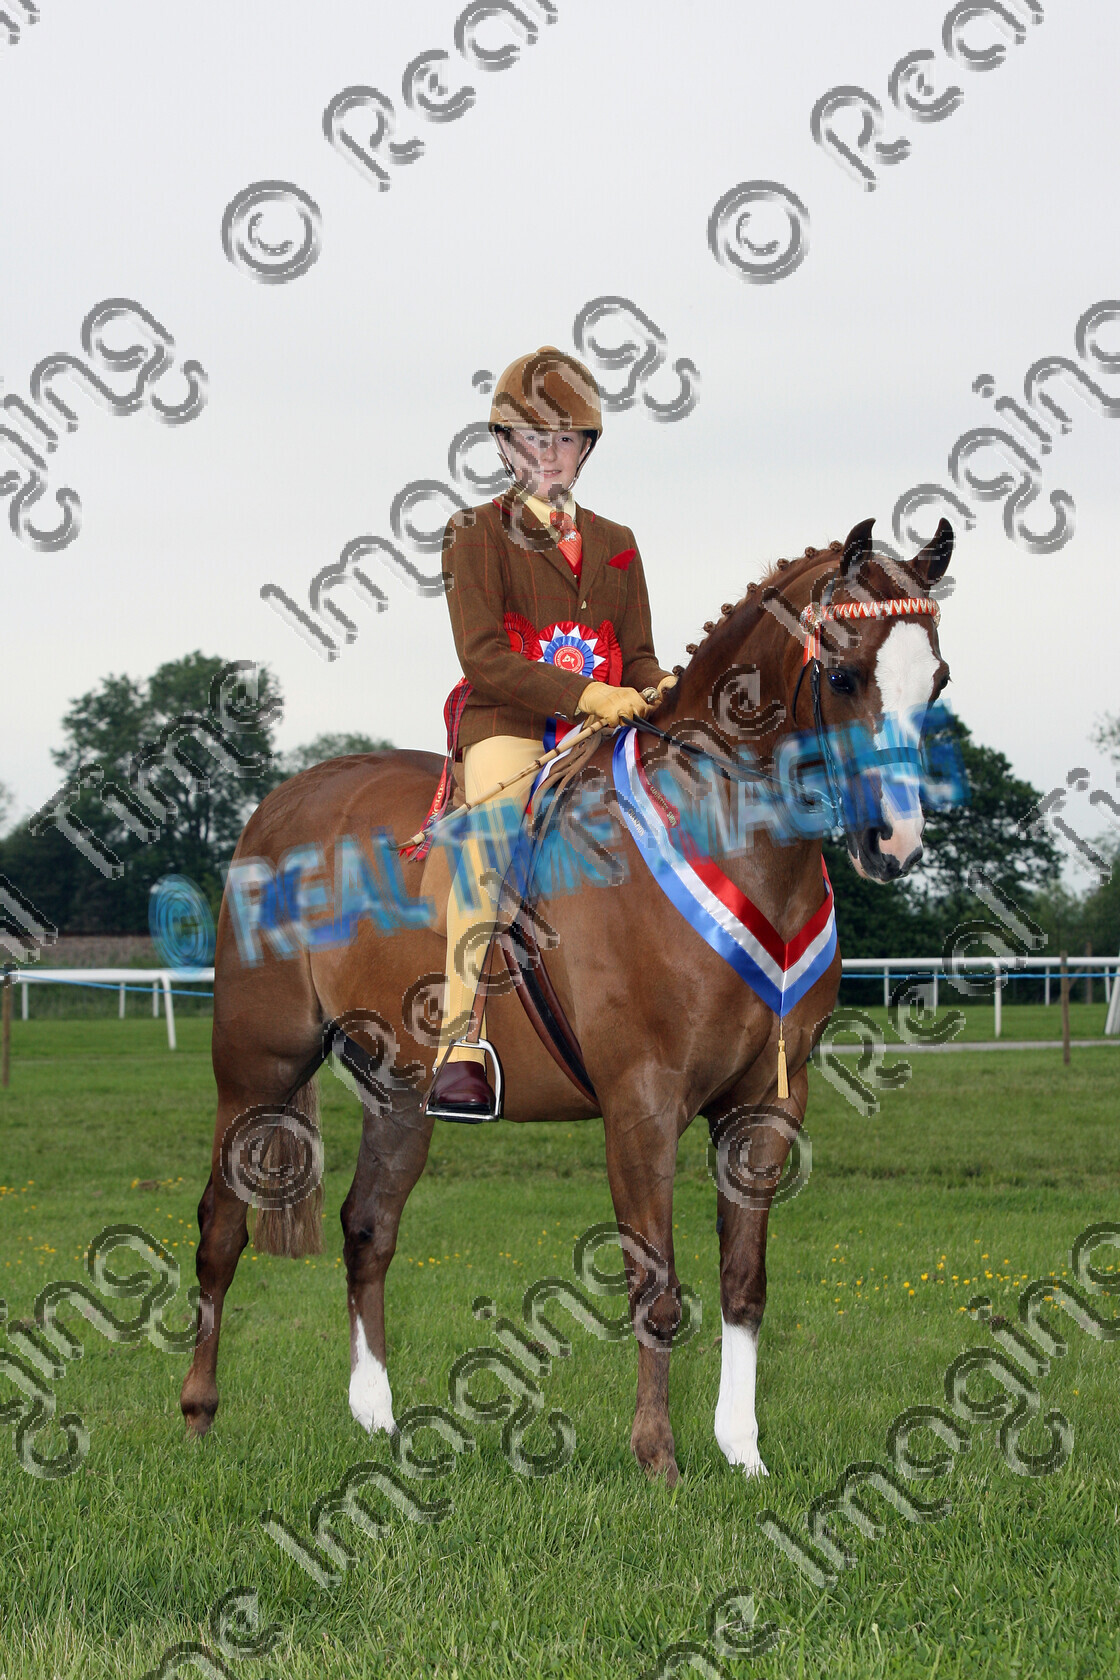 S08-22-13-039 
 Keywords: Midland Counties Show, Uttoxeter Racecourse, UK, Sunday, 1 June, 2008, upright portrait, Ridden, Arab, Championship, 1st first, Champion, winner win won, 1445, BANKSWOOD IMAGINATION, `Owner: , `Rider: , Bradley Leyland, chestnut, Gelding, Anglo And Part Bred Arab, brow band, child rider, Rosette, sash, stand, presentation